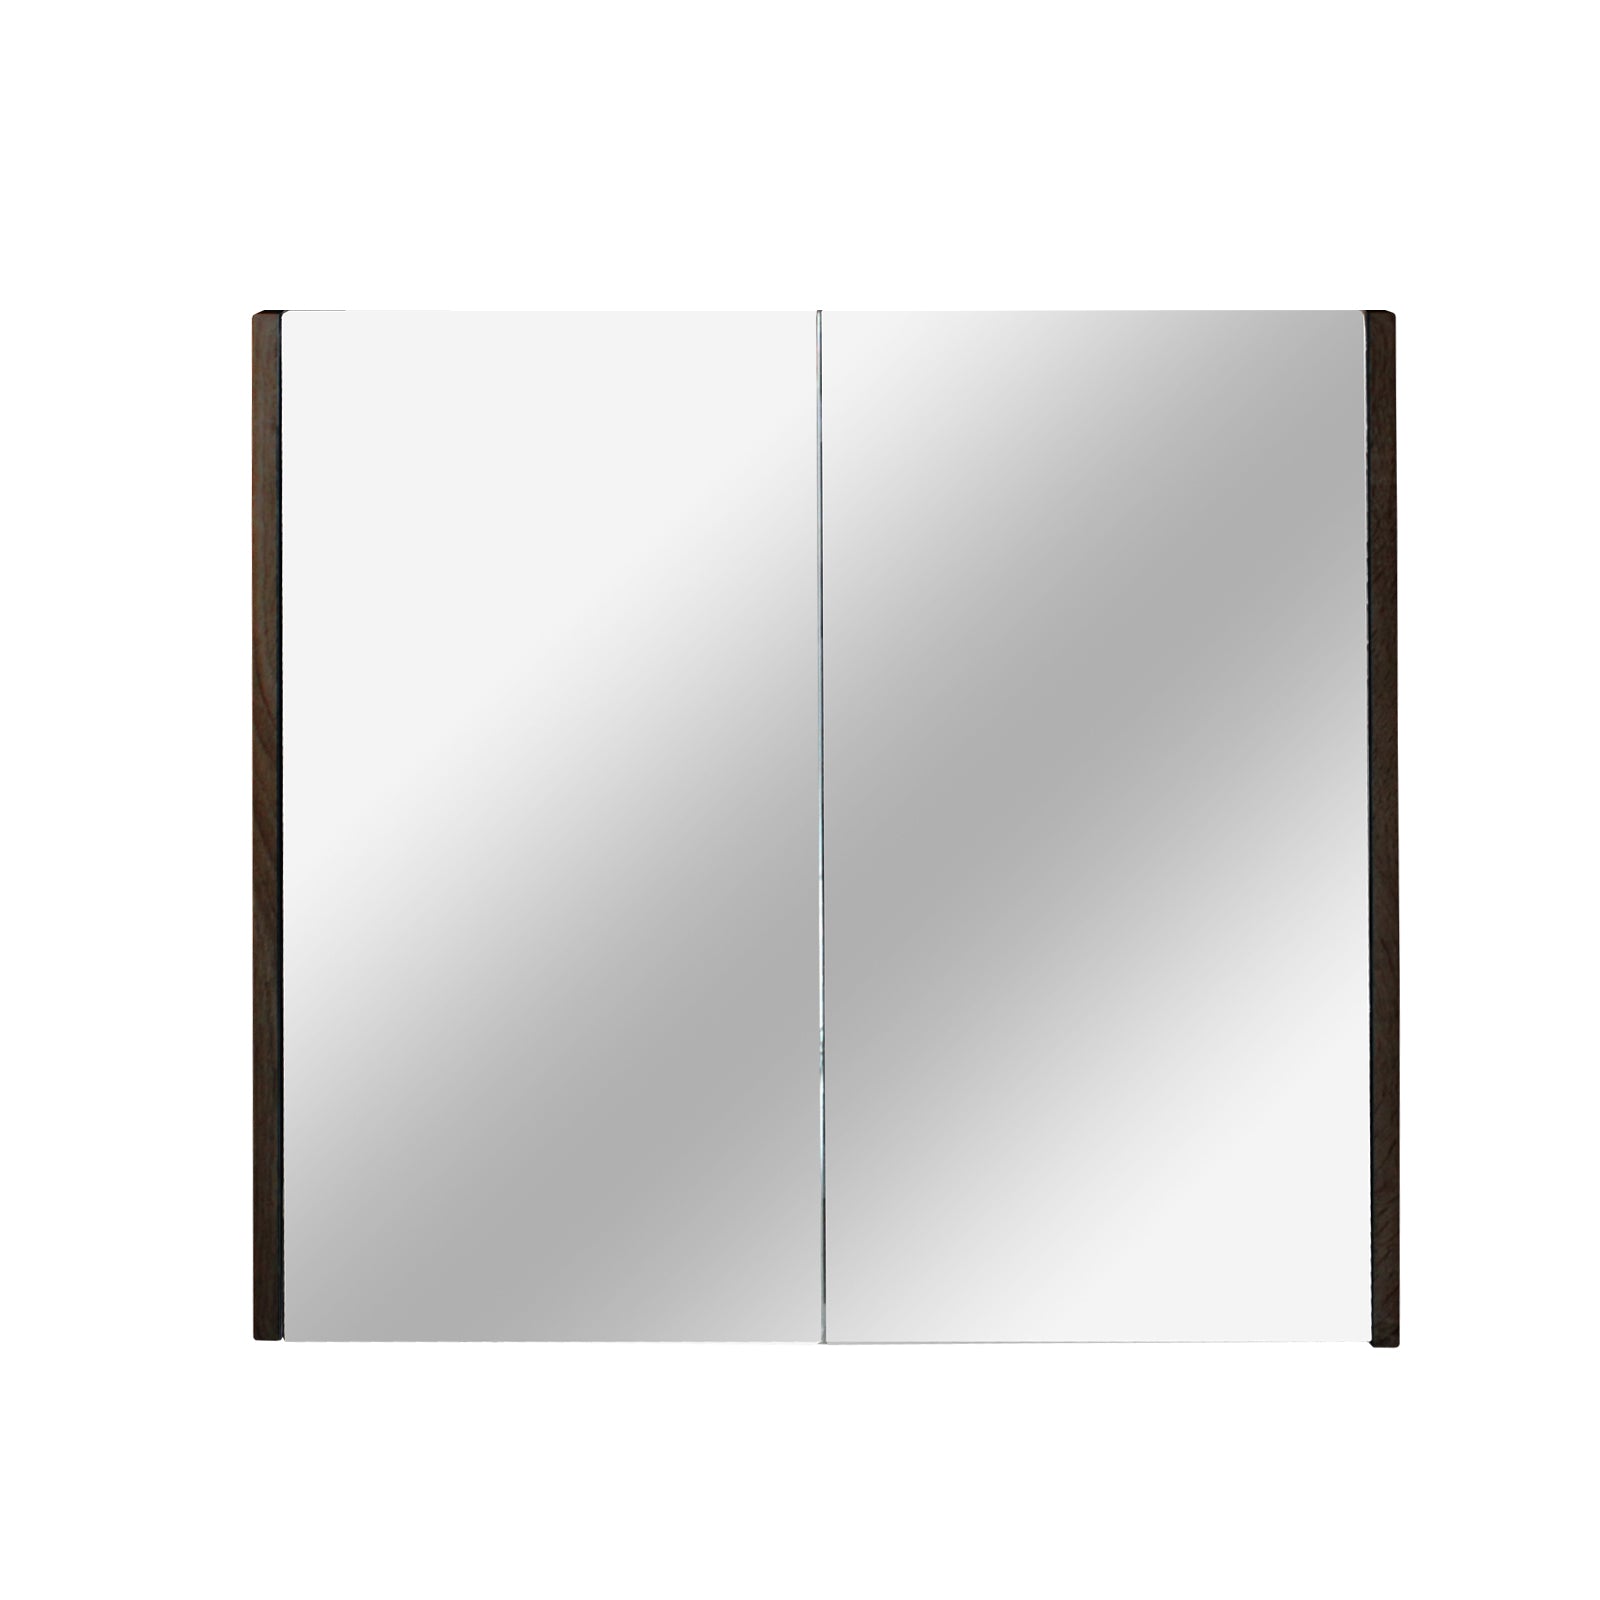 POSEIDON DARK GREY QSVDG QUBIST MIRROR SHAVING CABINETS (AVAILABLE IN 600MM, 750MM AND 900MM)